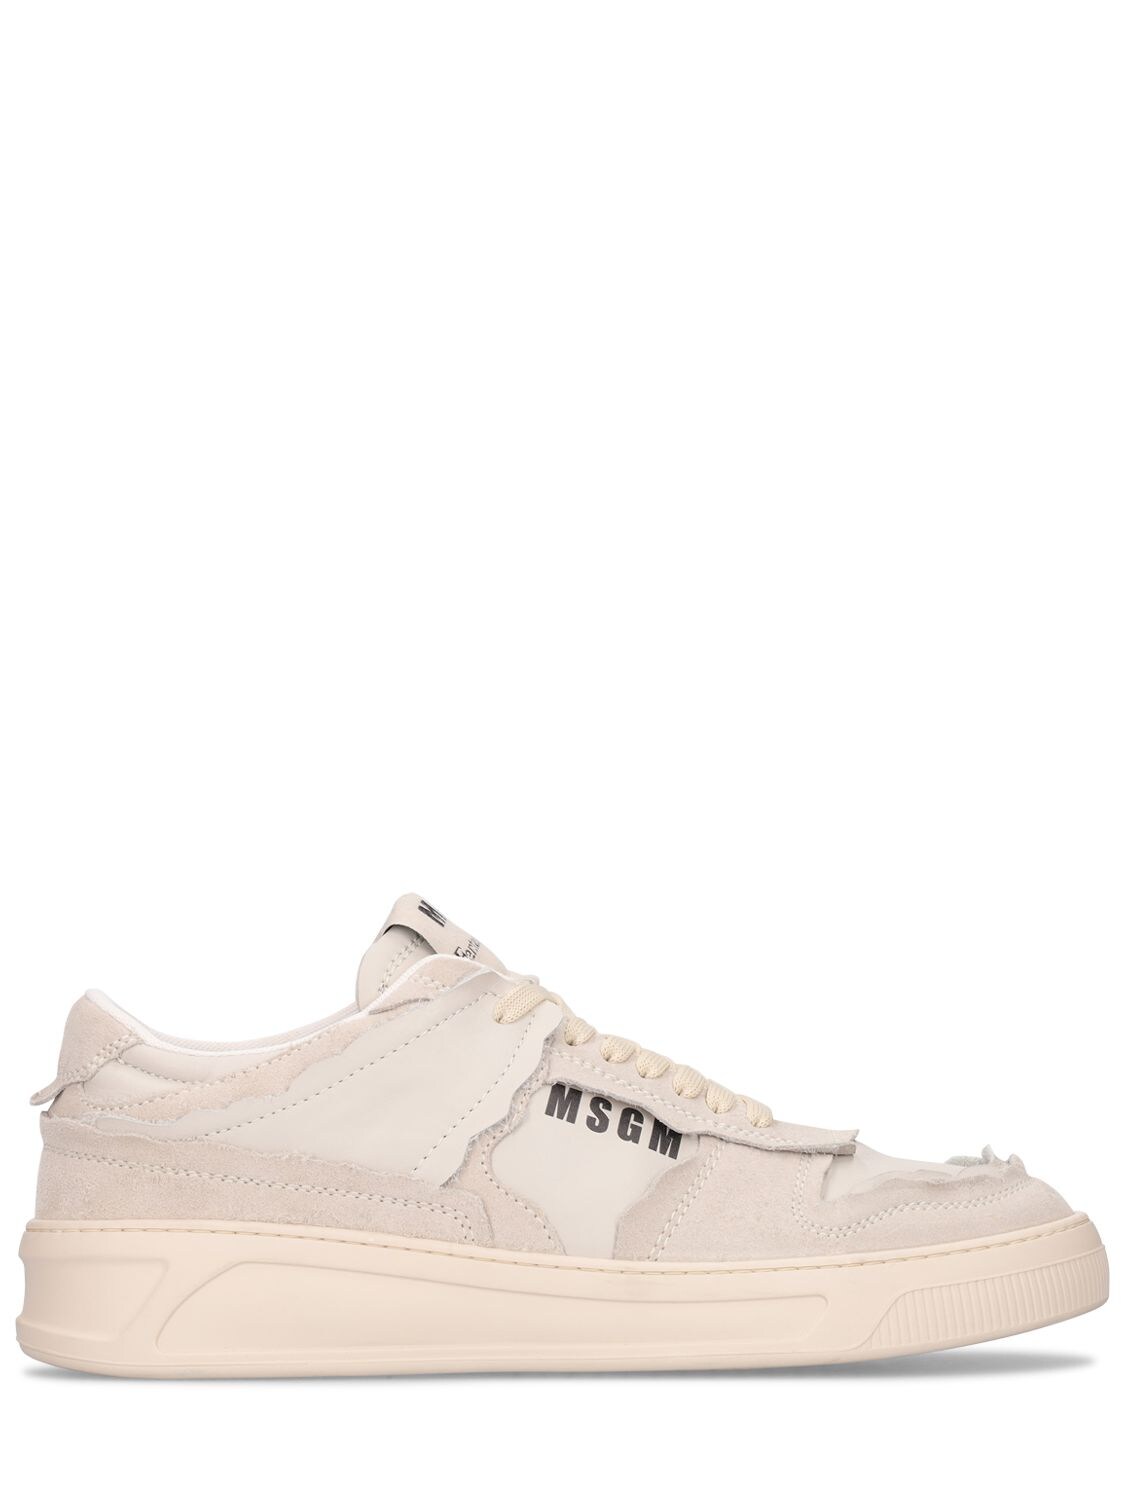 Msgm Low Top Suede Sneakers In White